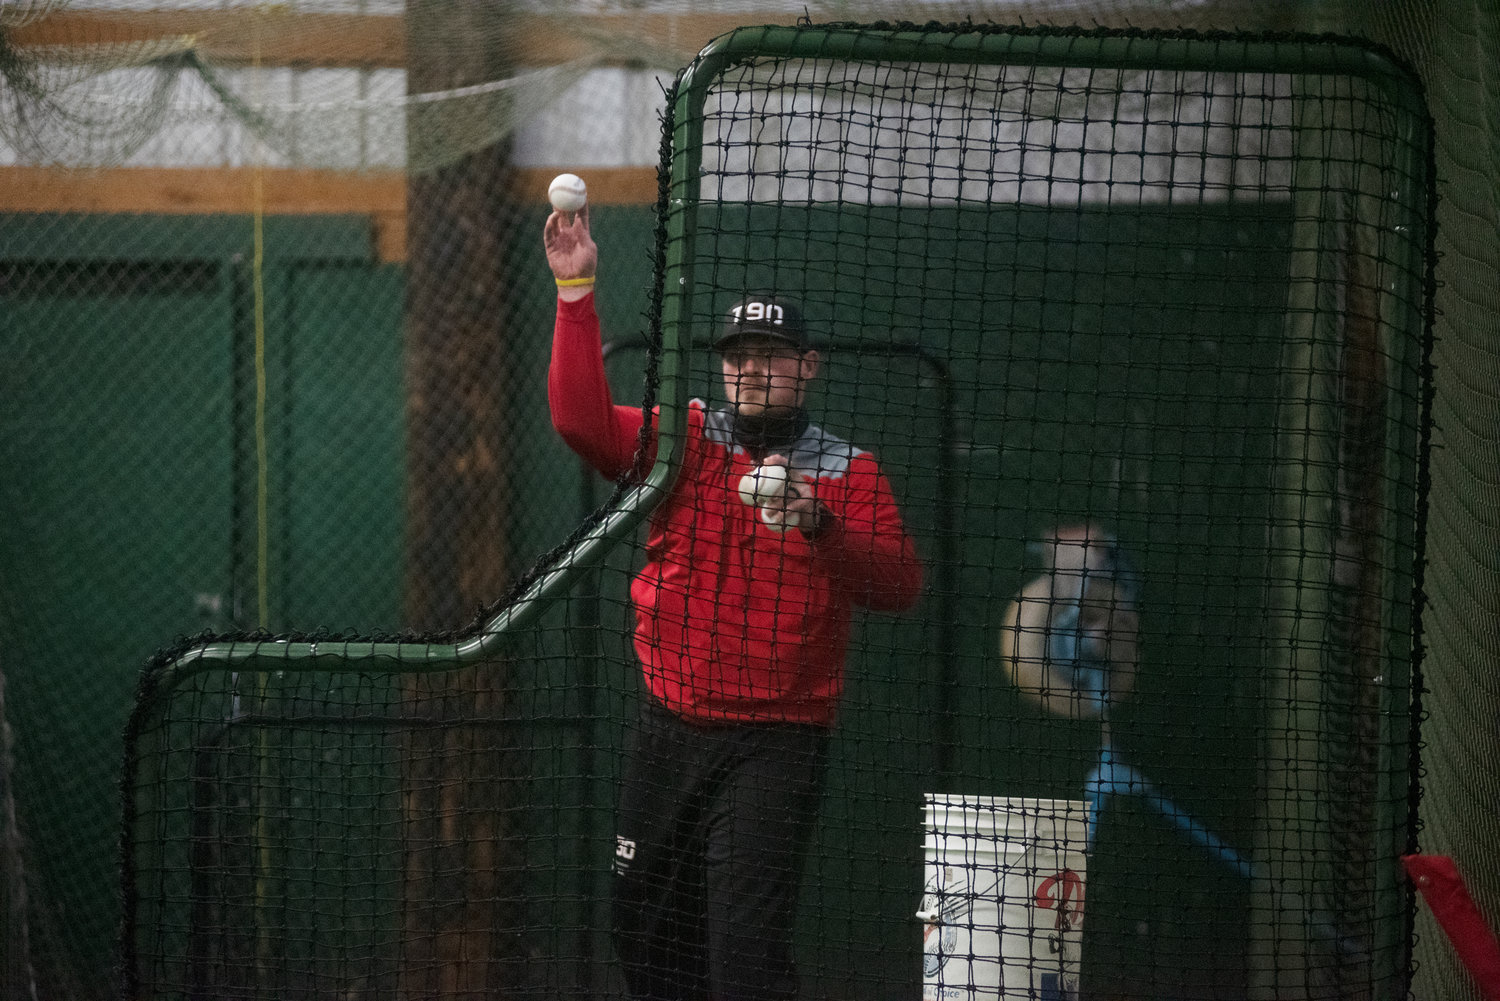 Tenino coach Ryan Schlesser throws pitches to his players in the Beavers’ batting cage on Nov. 4.